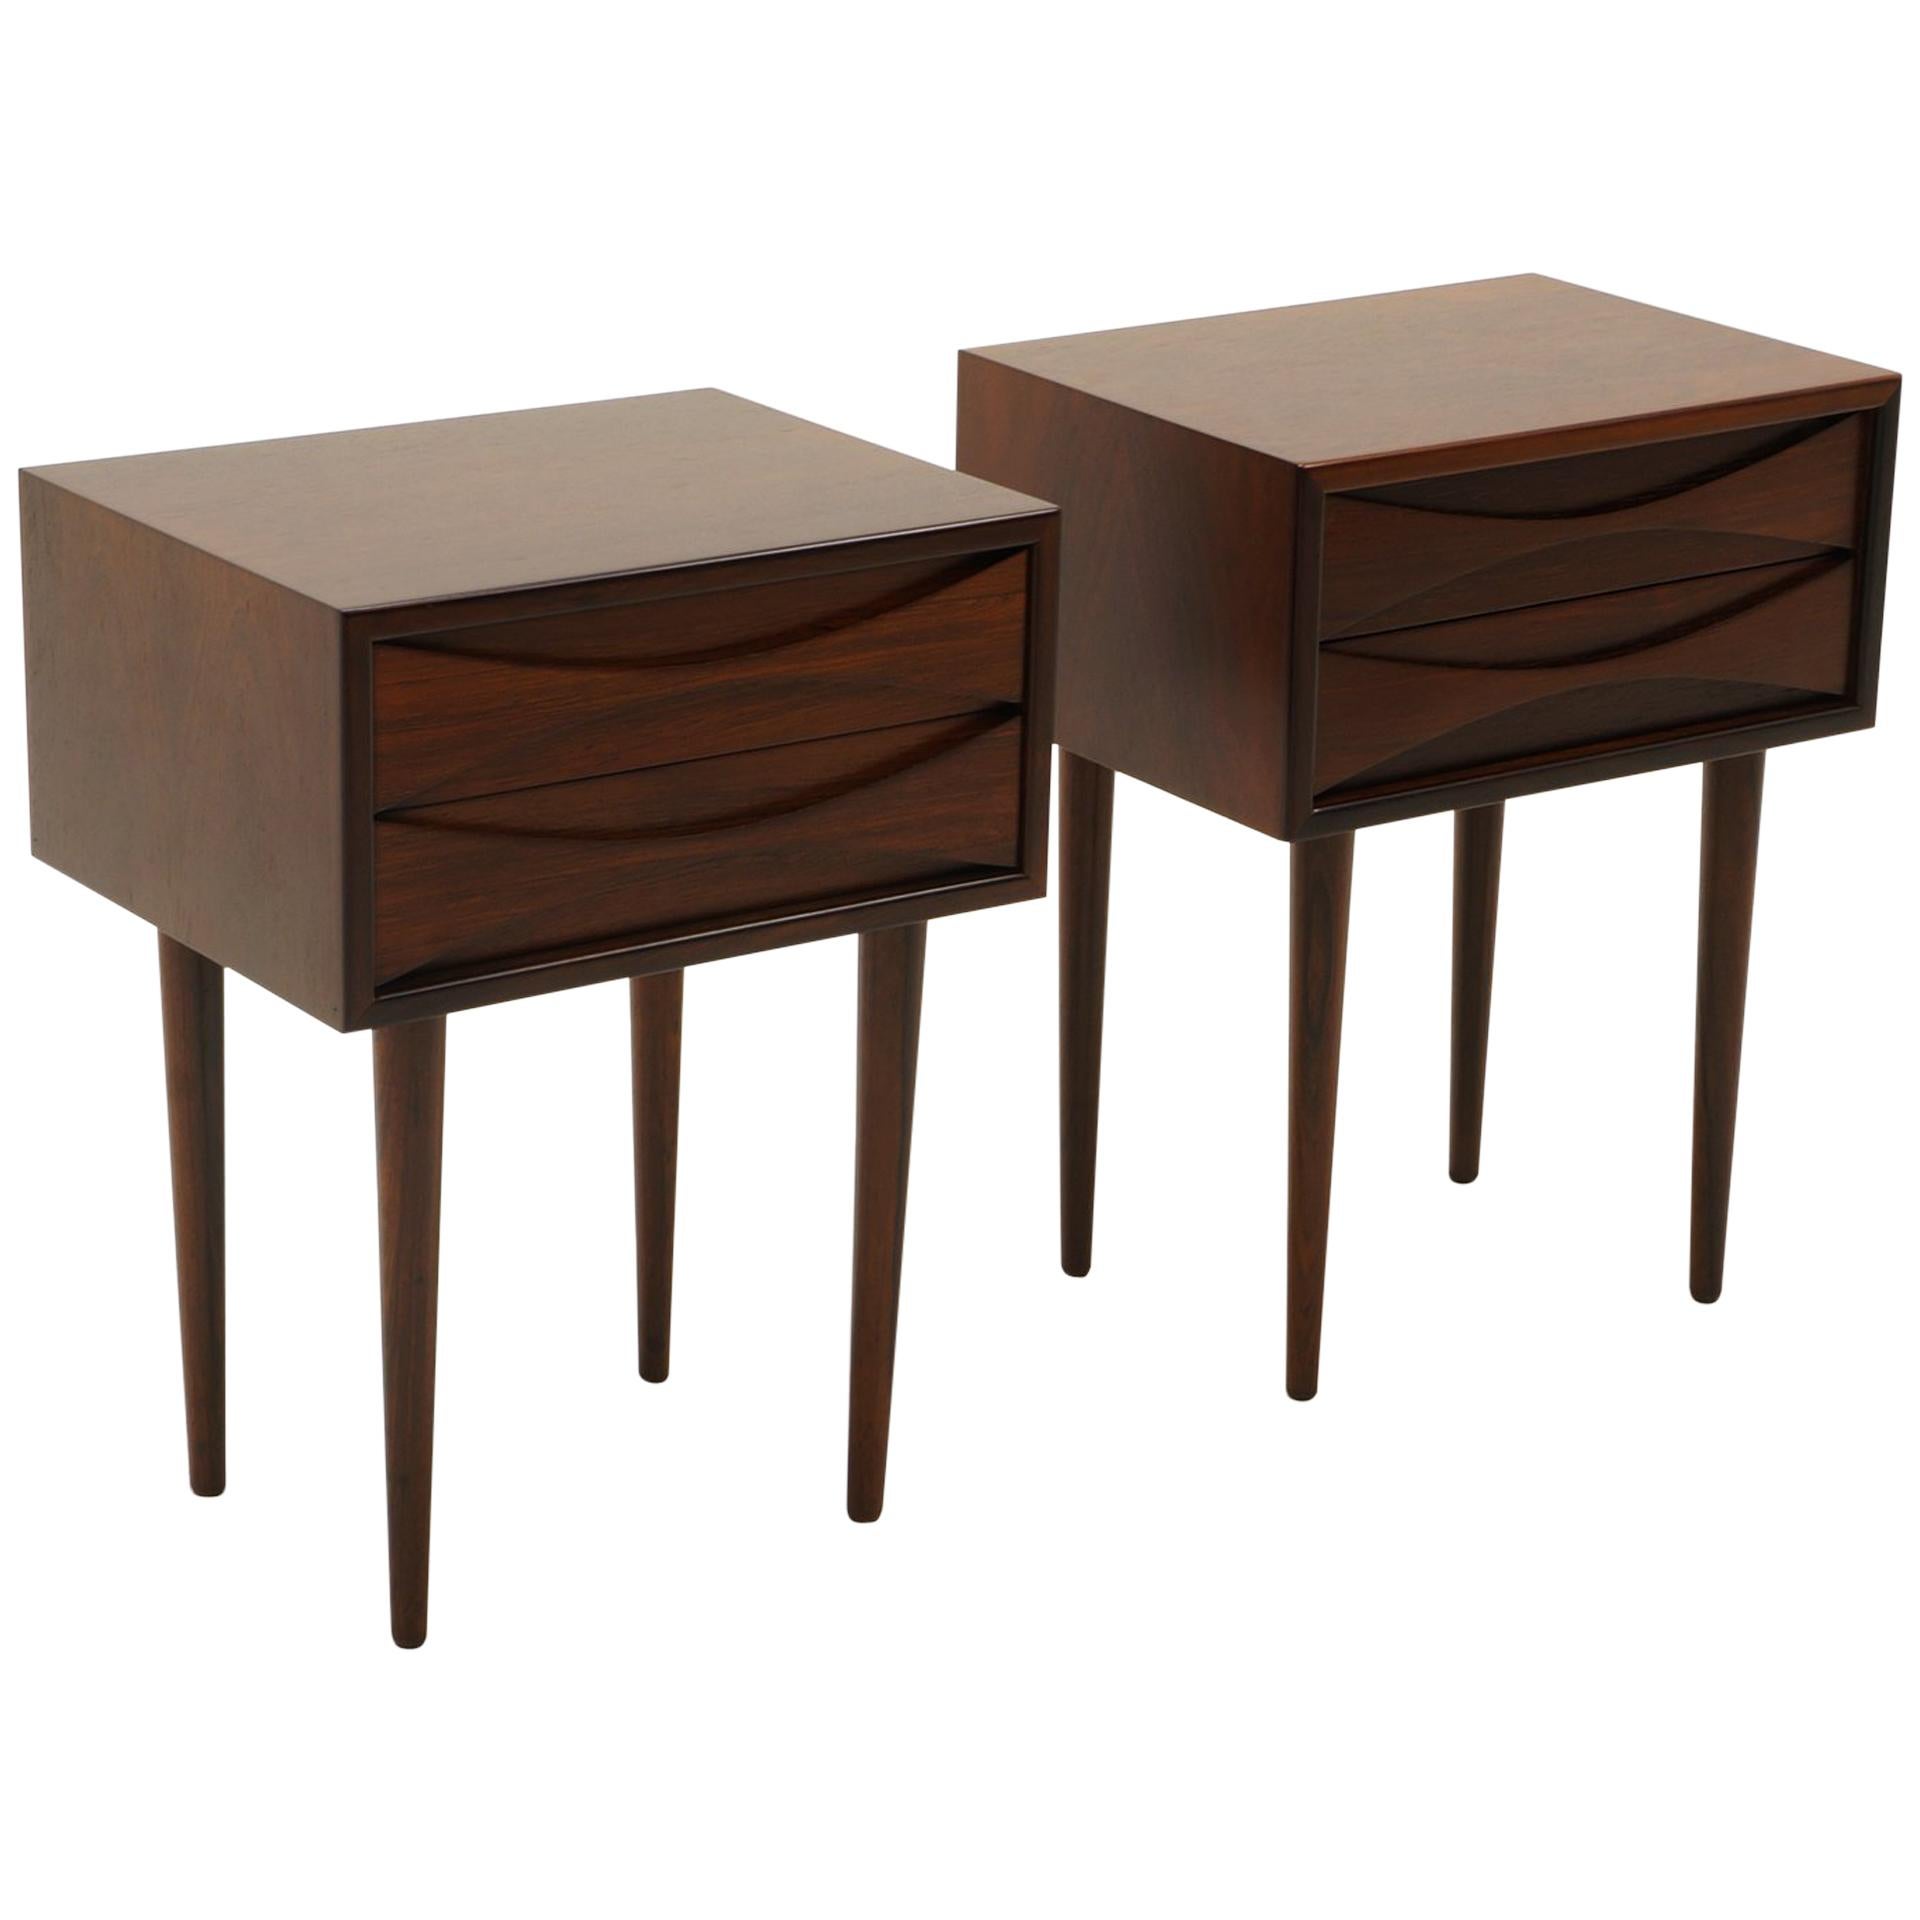 Pair of Arne Vodder Rosewood Side Tables / Nightstands / Night Stands  Excellent